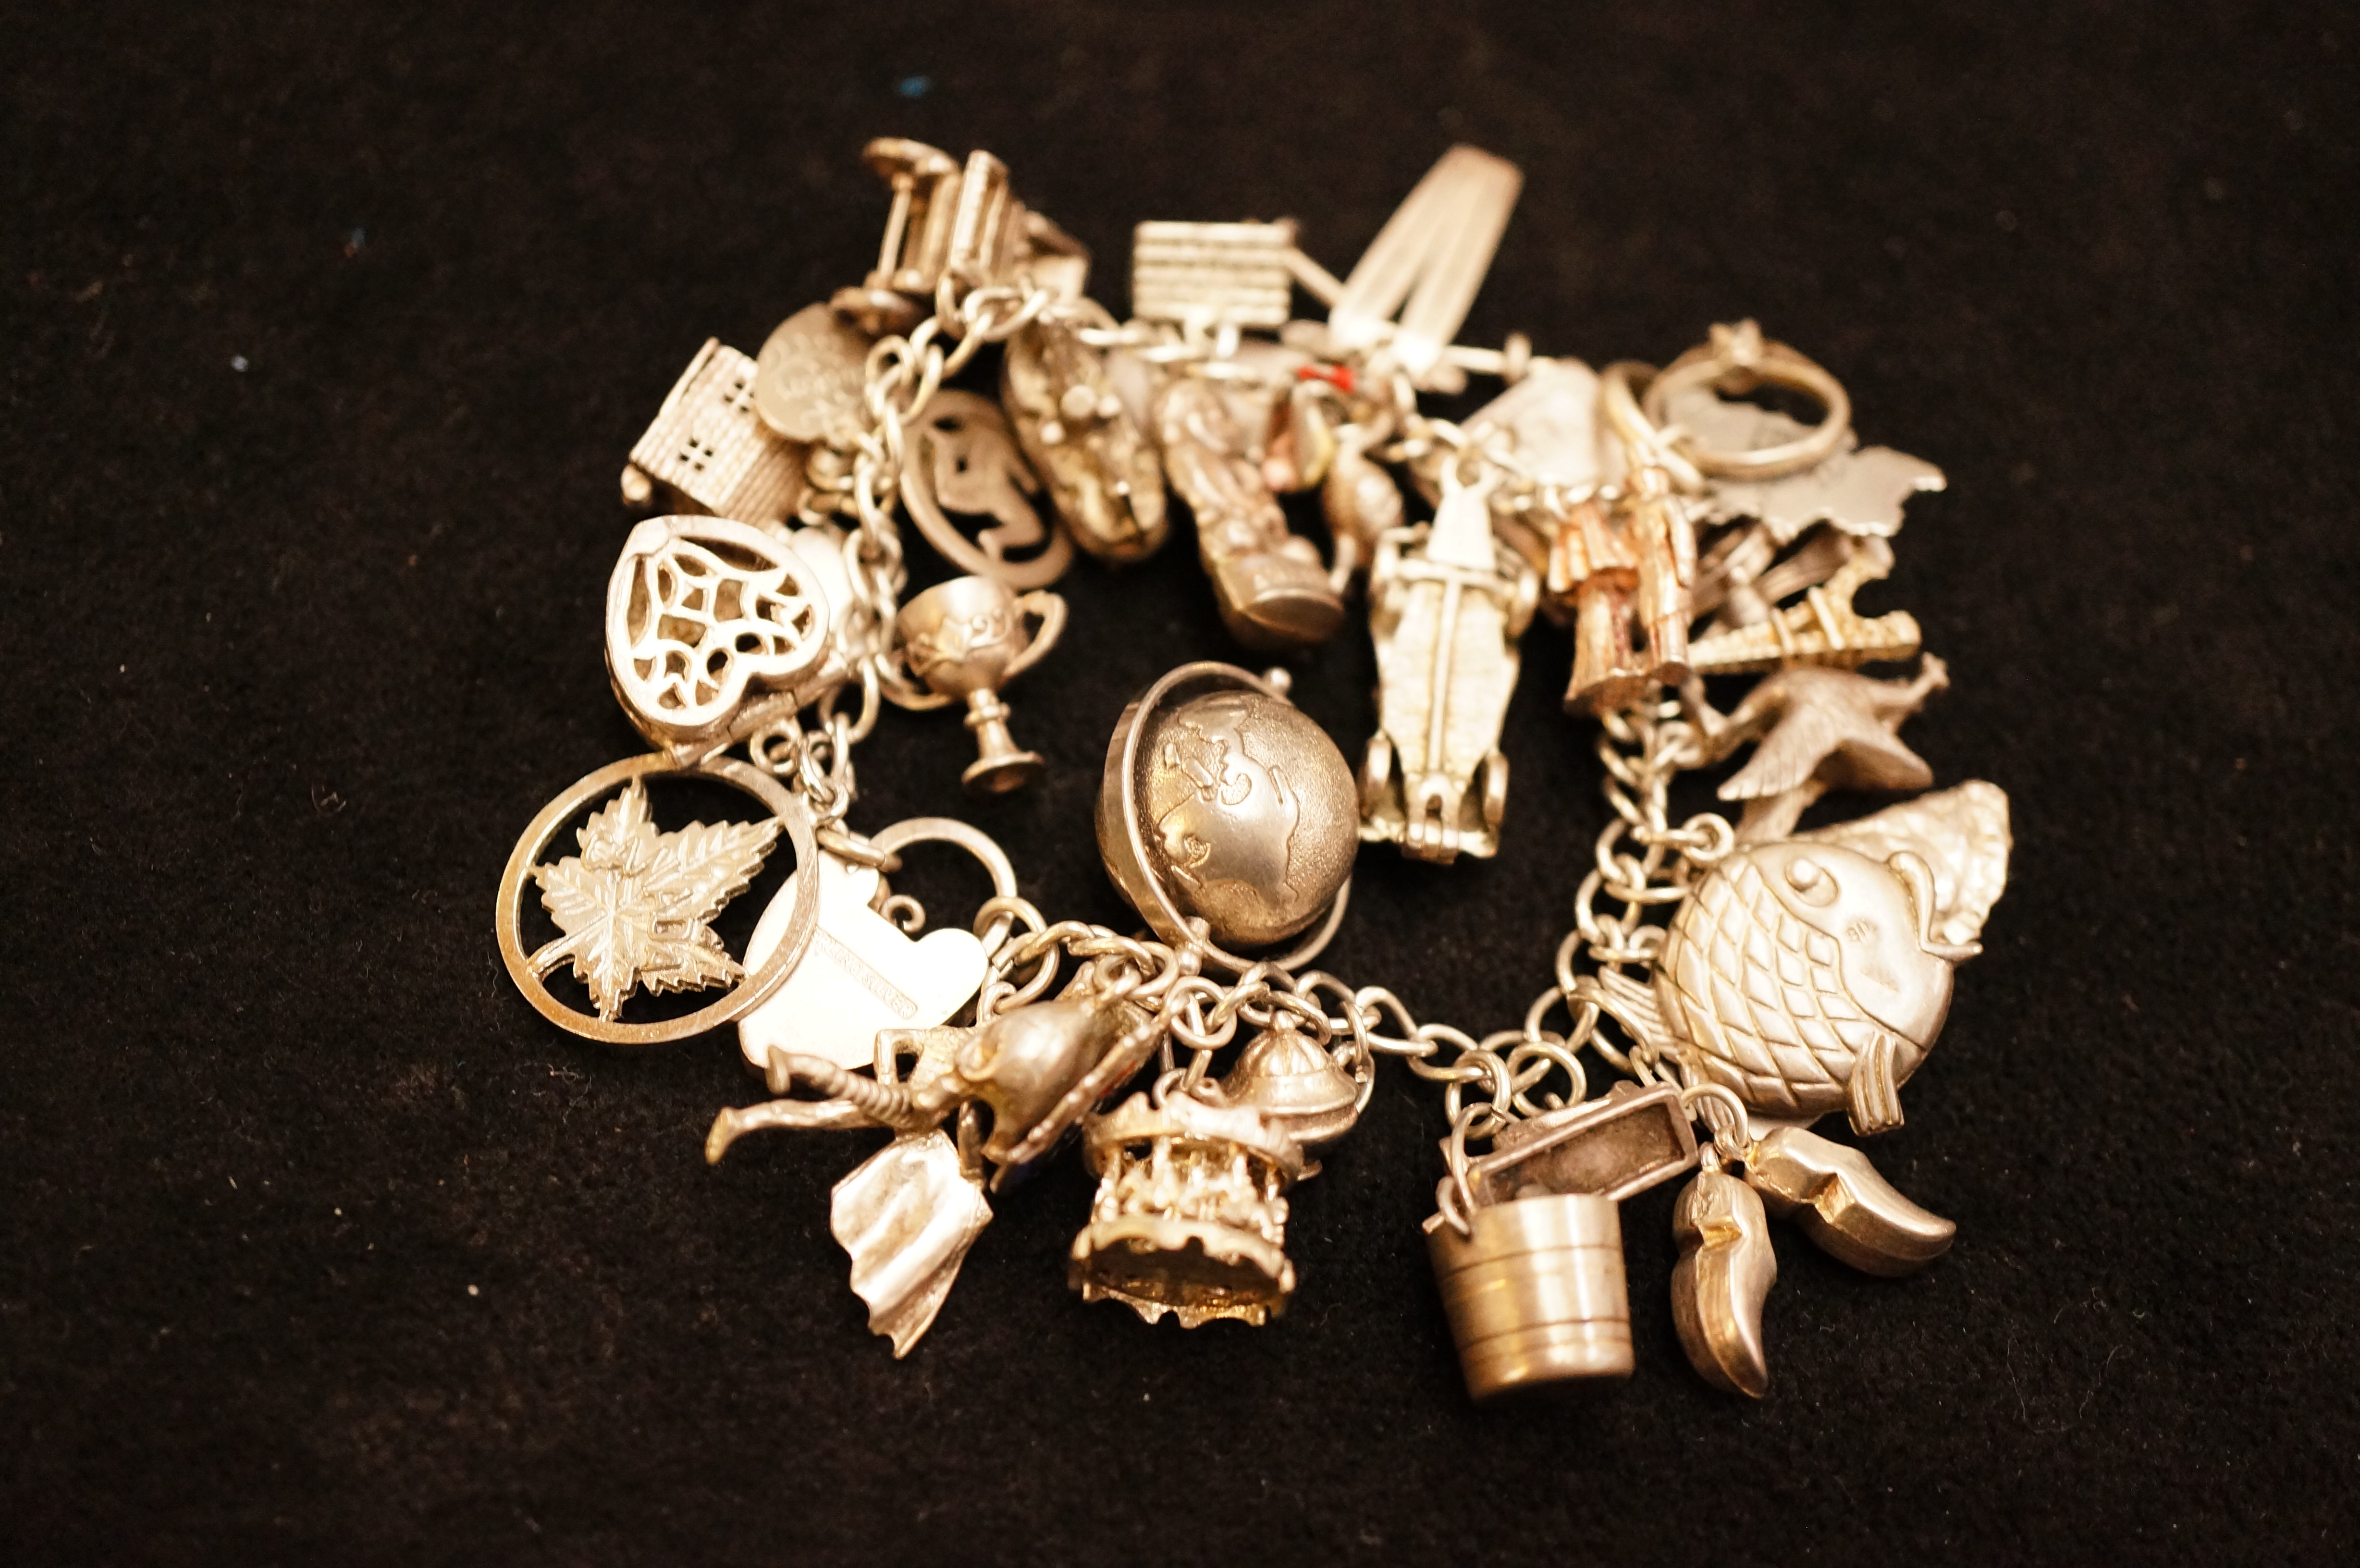 Silver Charm Bracelet with many Charms - 94g